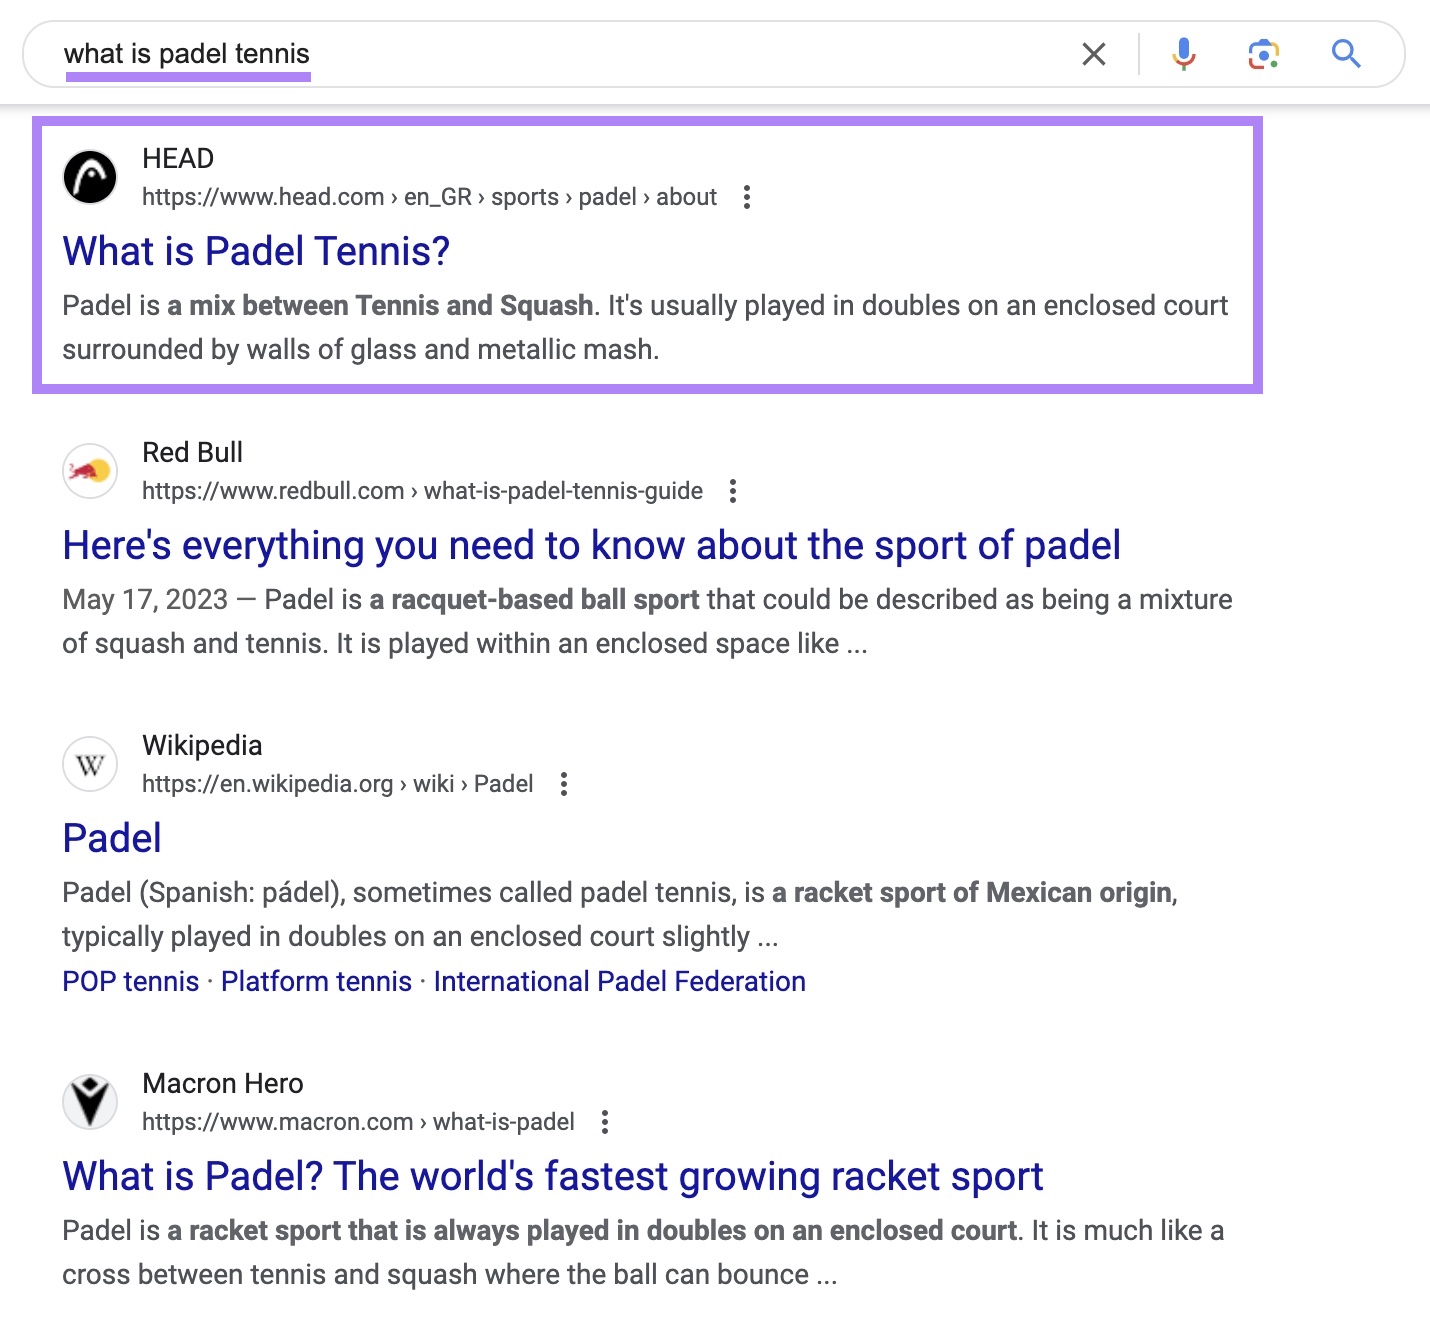 Google search results for "what is padel tennis" showing Head with the top result.